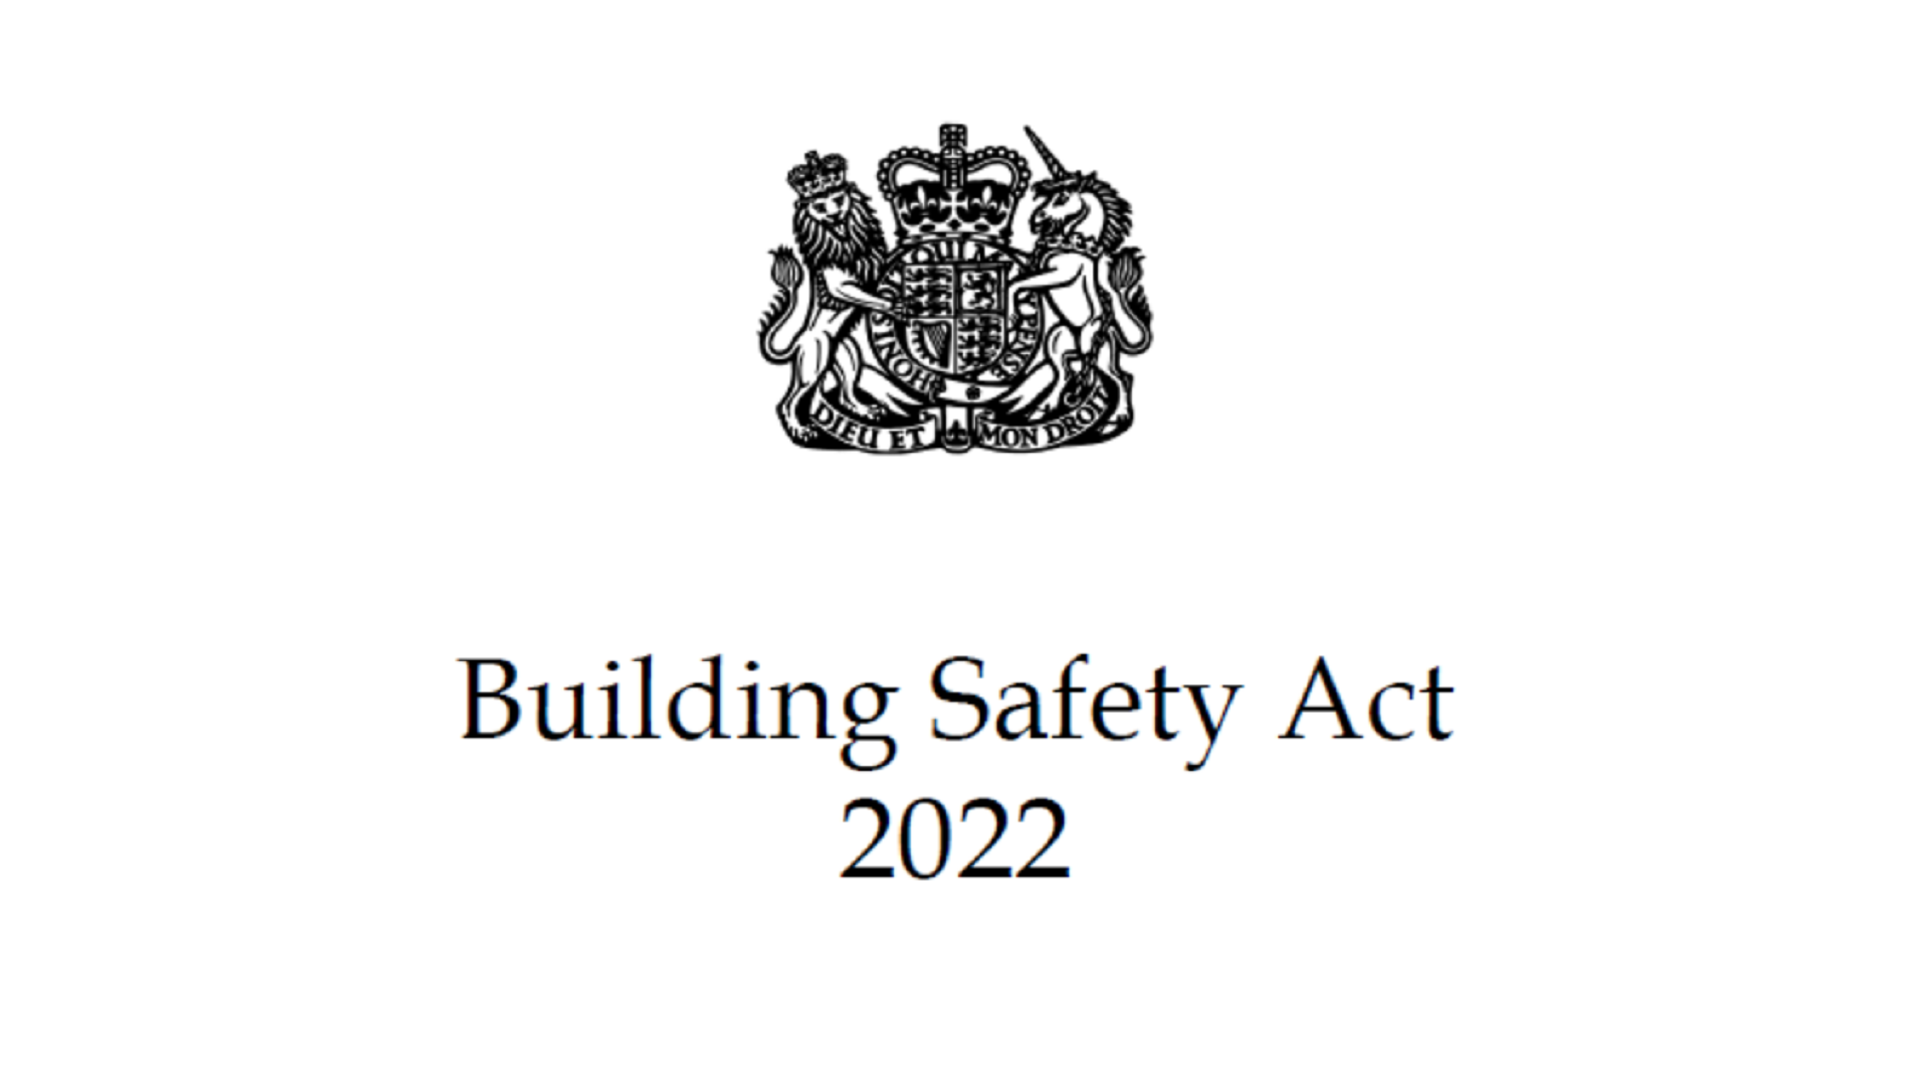 https://www.decontaminateuk.com/wp-content/uploads/2023/05/building_safety_act_2022.png